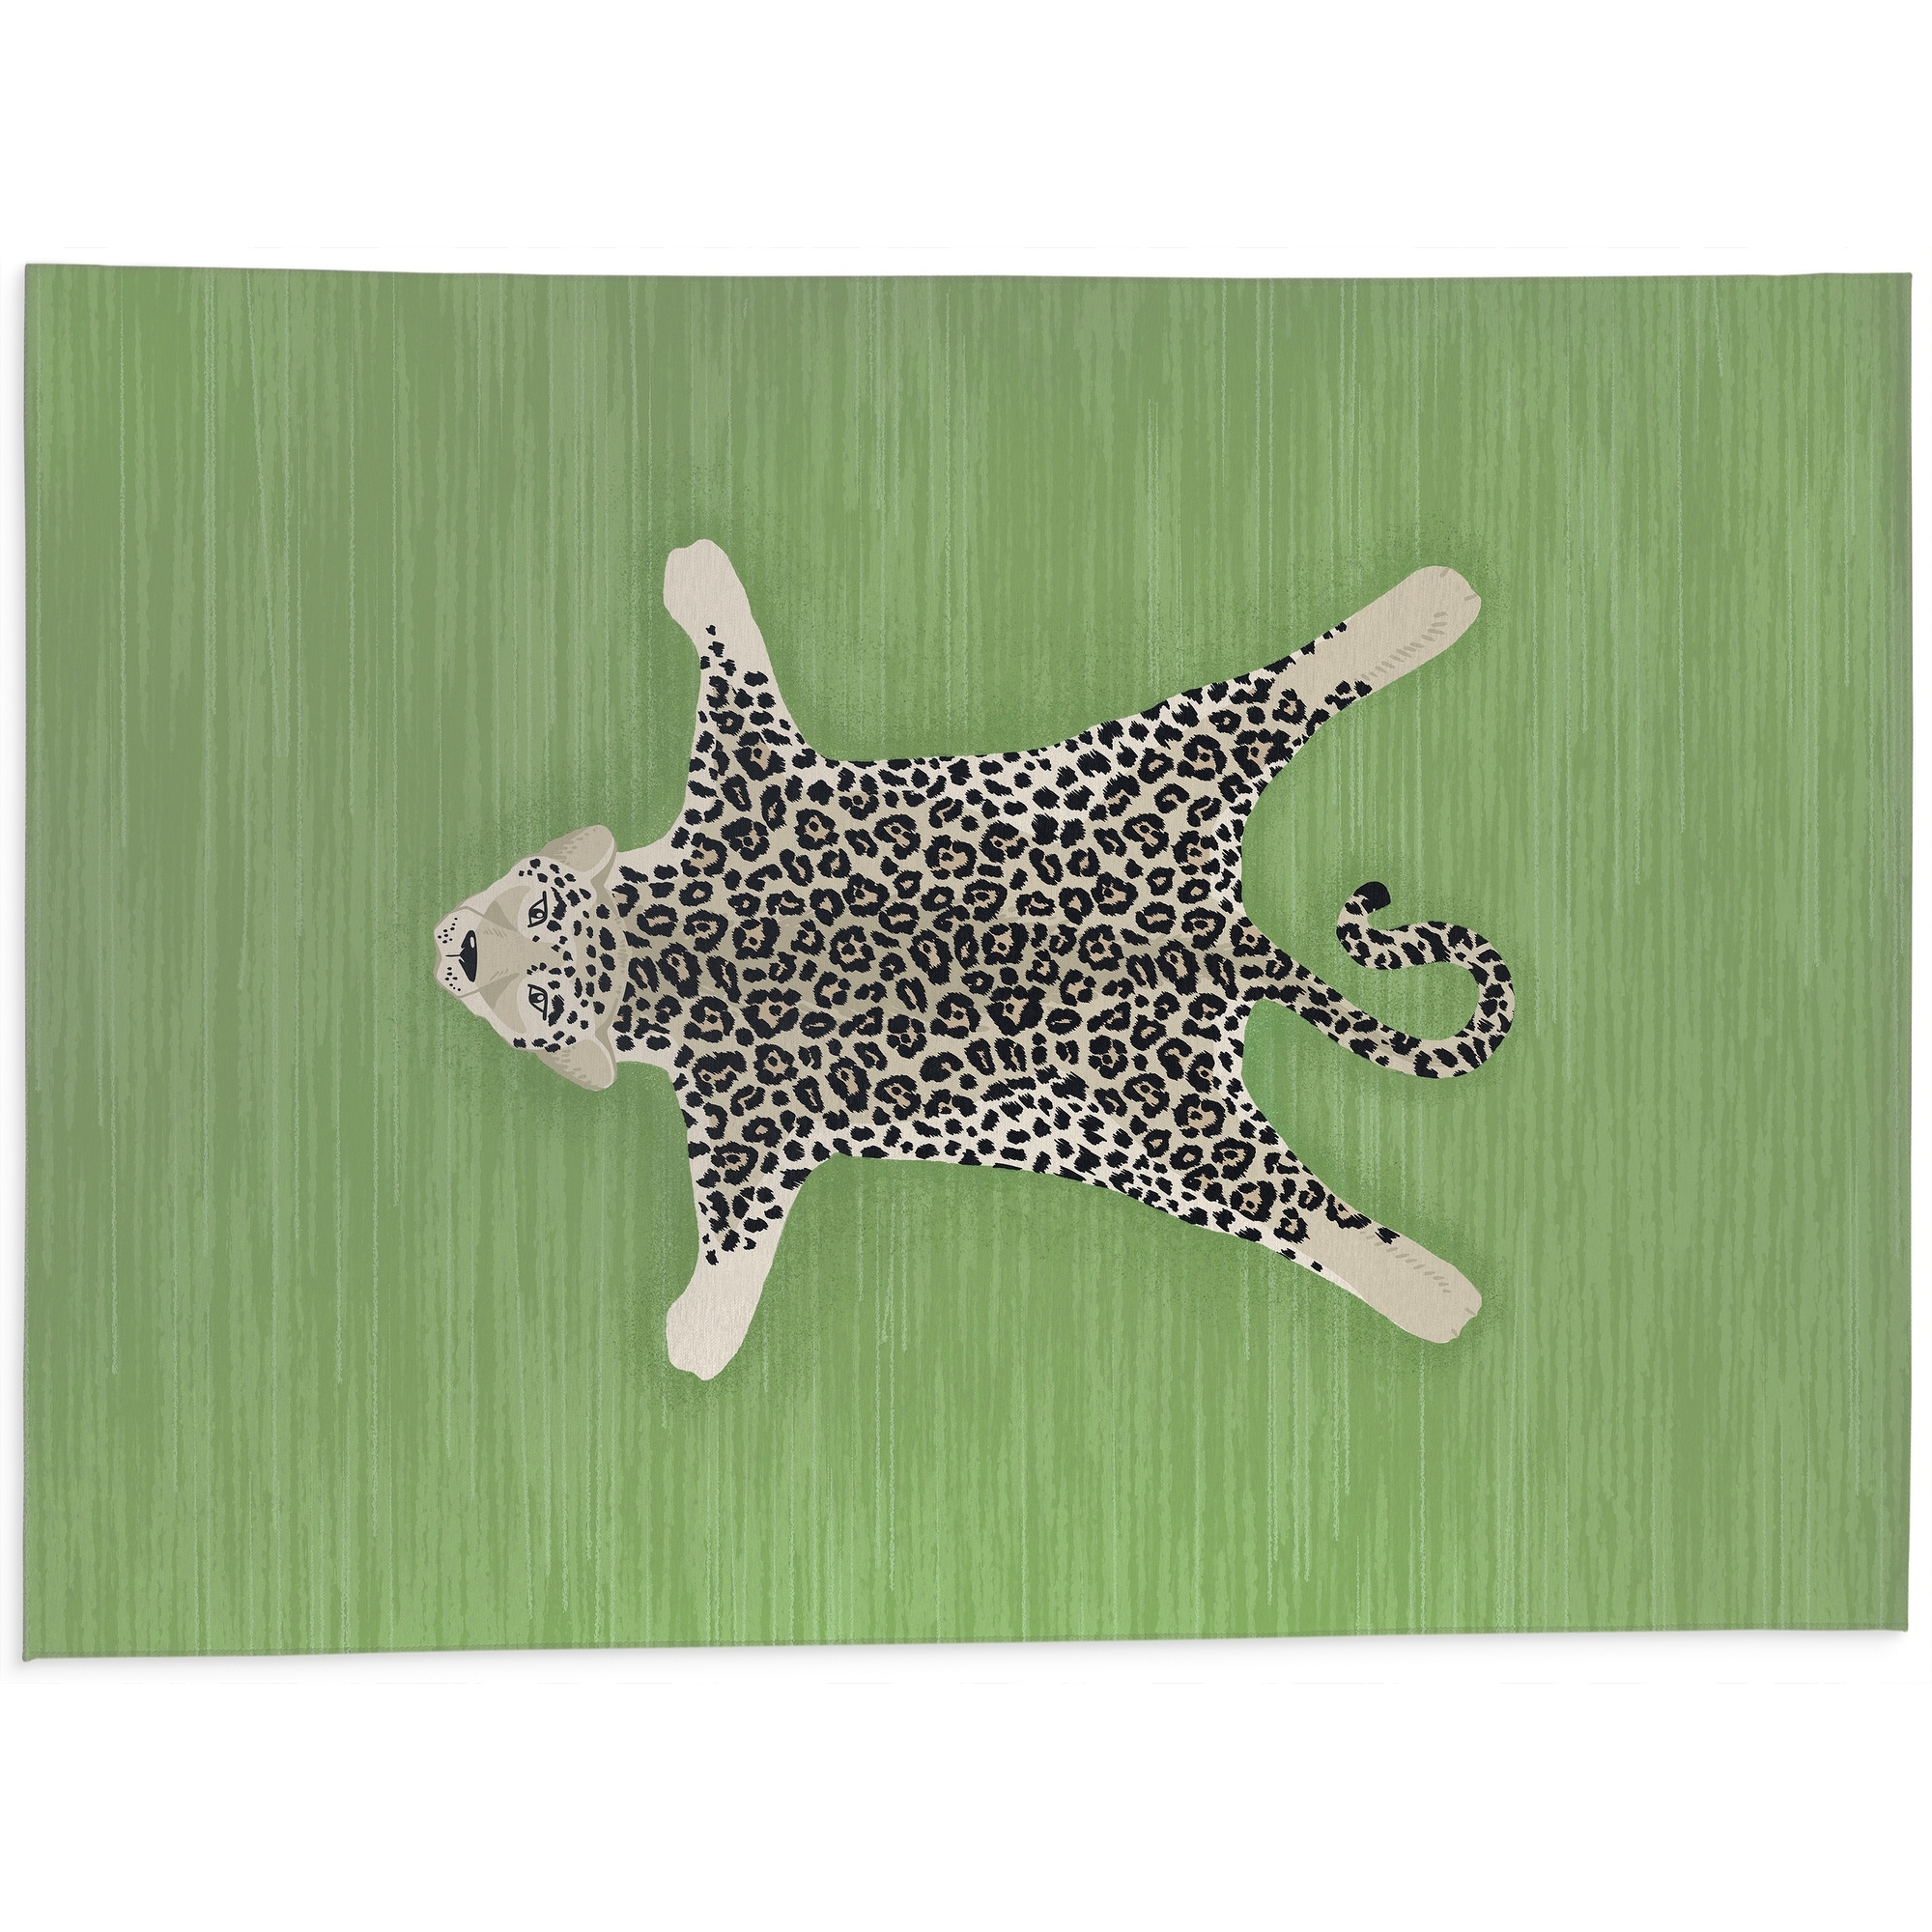 https://ak1.ostkcdn.com/images/products/is/images/direct/8a5a8509d991f7ca27c8b841d5e358d3a9175c8e/SNOW-LEO-GREEN-Indoor-Floor-Mat-By-Kavka-Designs.jpg